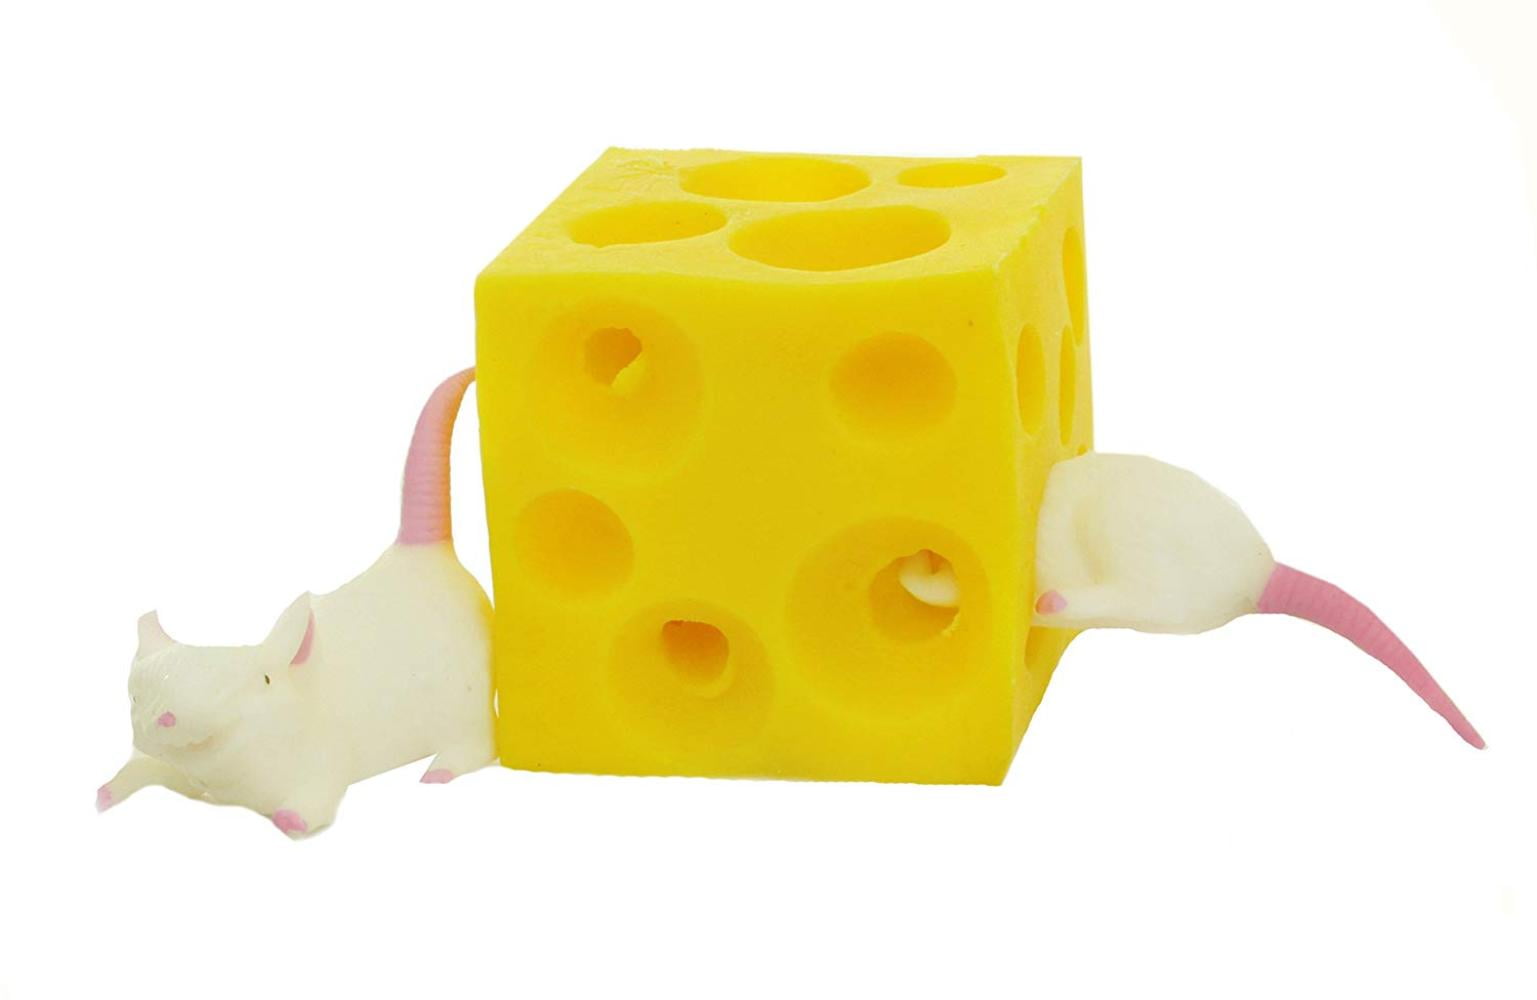 Stretchy Mice and Cheese Rubber Stress Ball Christmas Stocking Filler Toy 10209